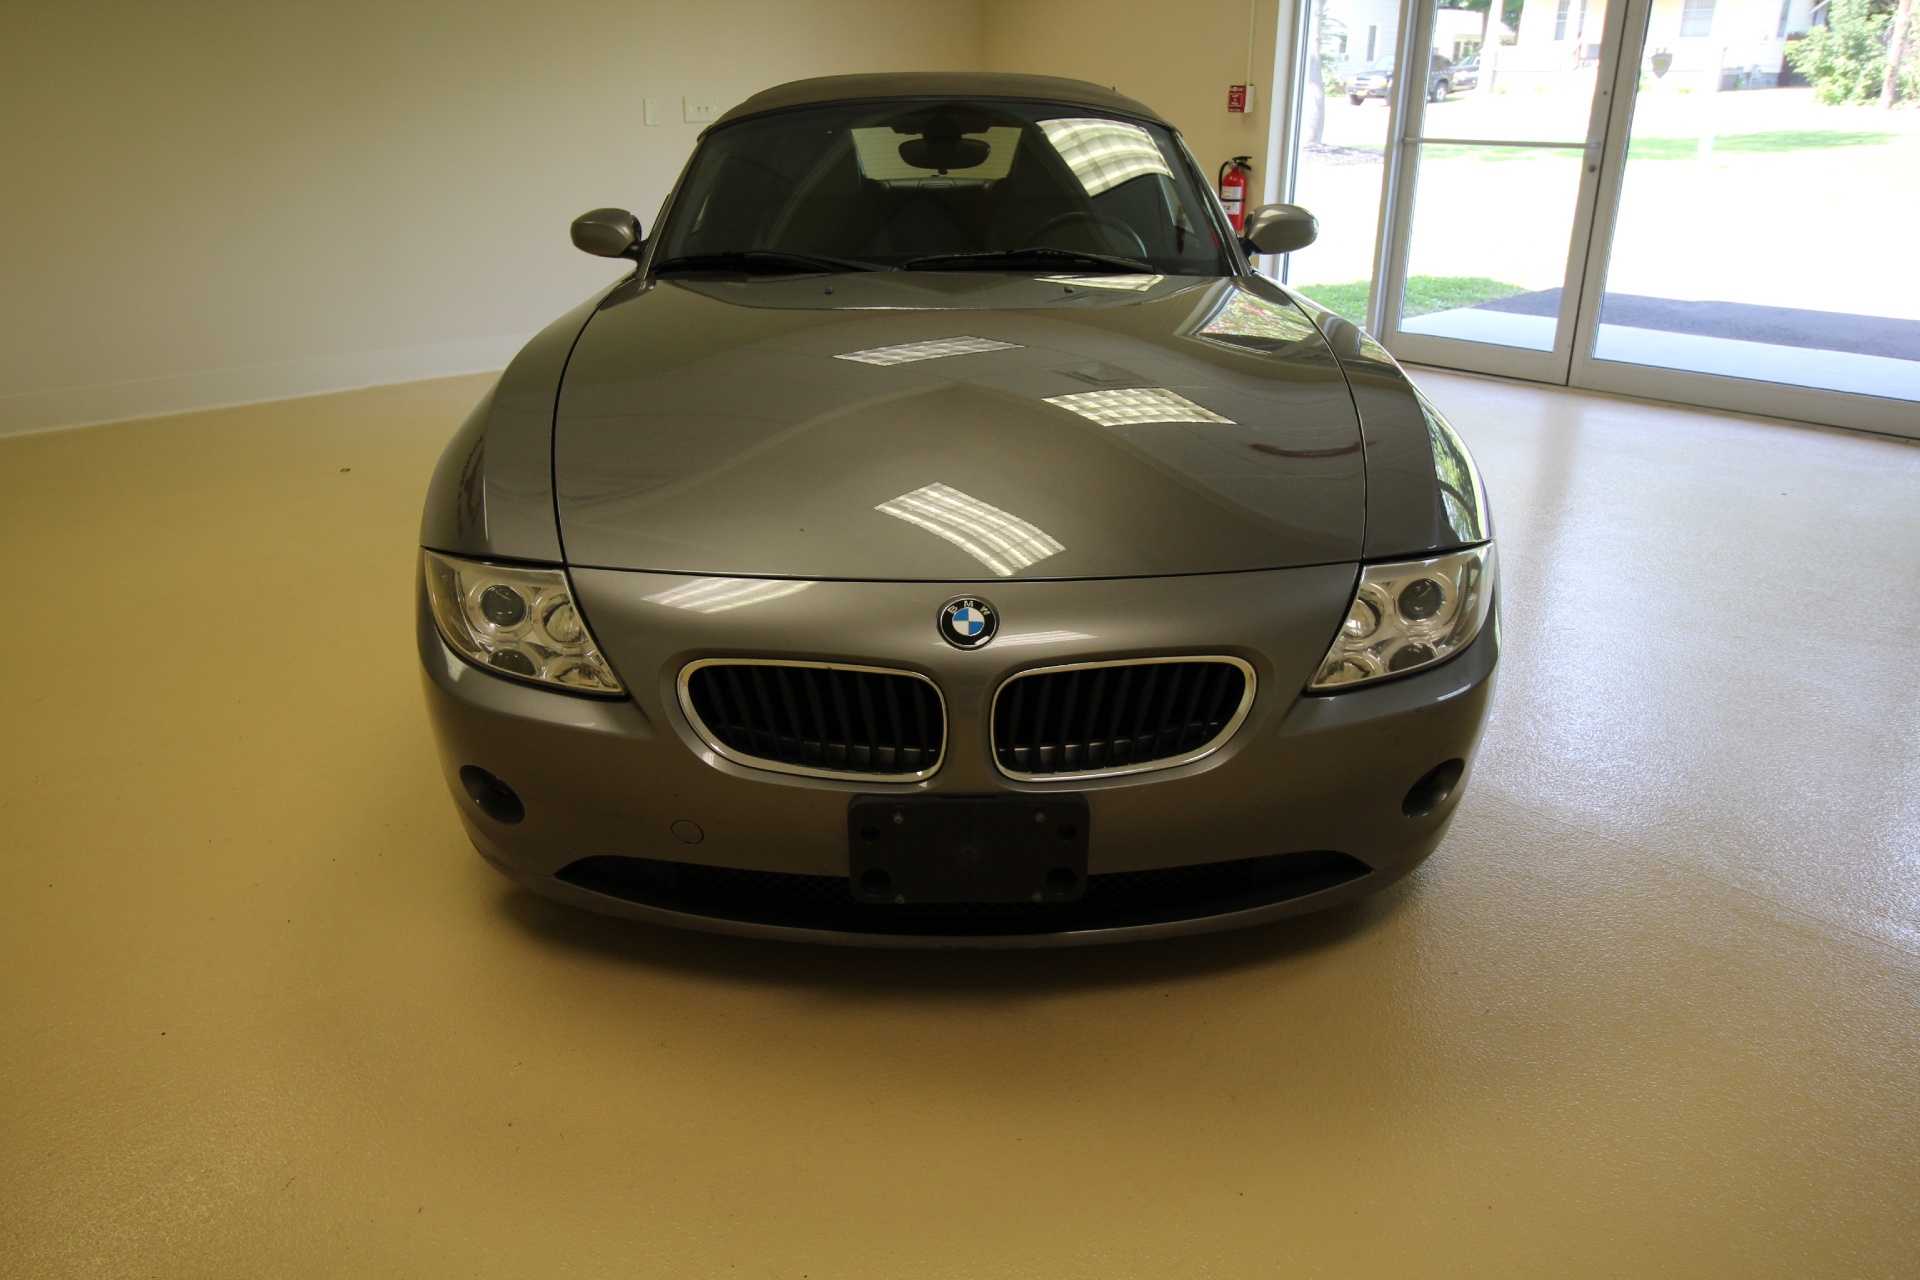 Used 2003 Sterling Gray Metallic with Gray Soft Top BMW Z4 2.5i | Albany, NY